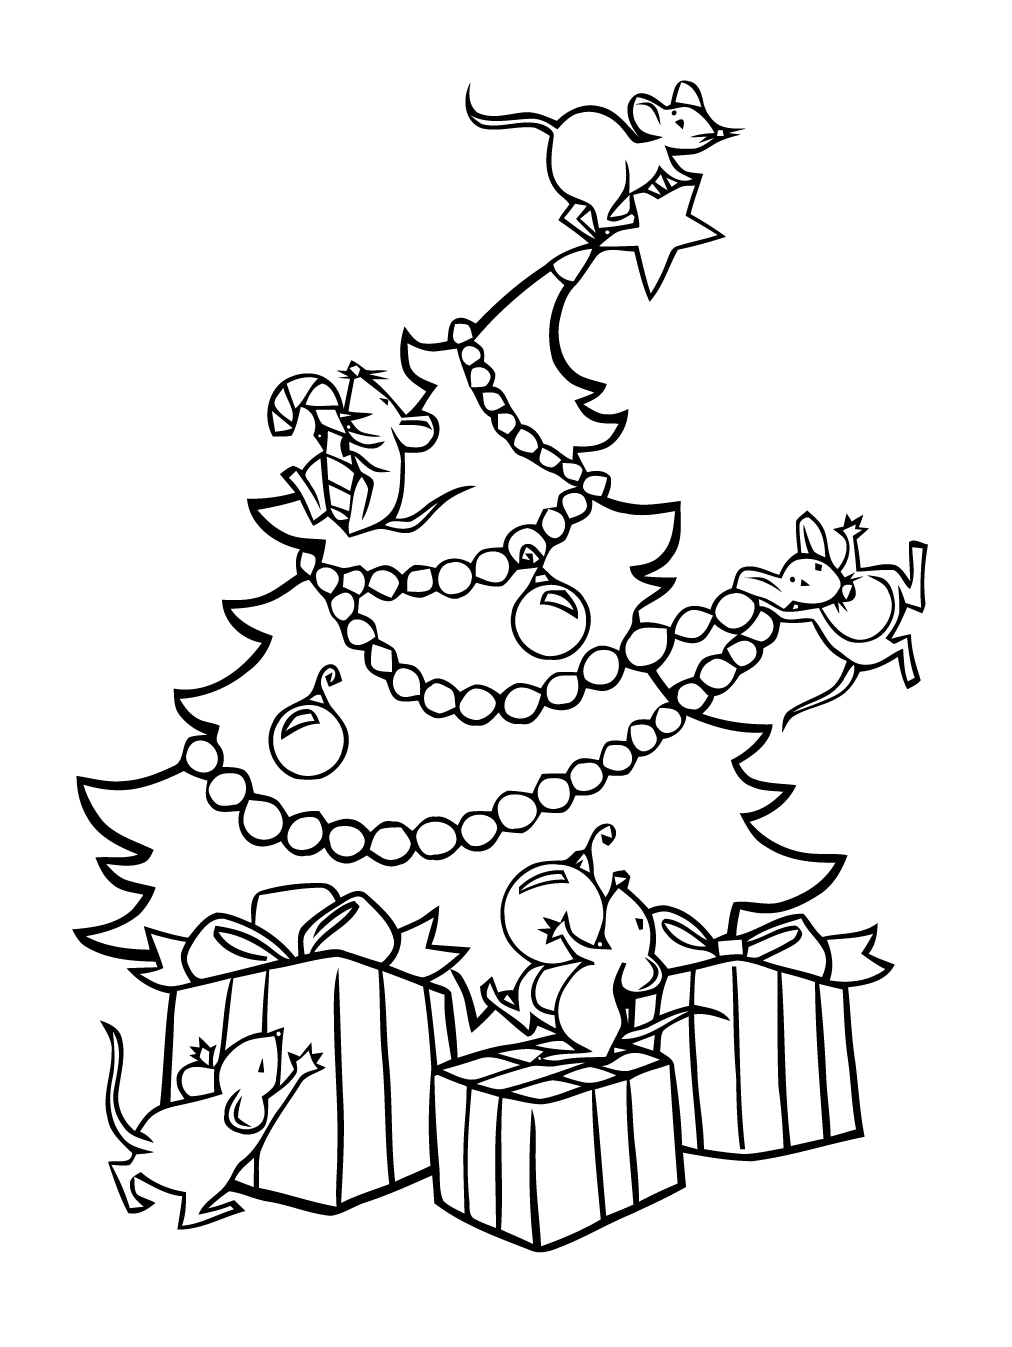 Fun Christmas tree coloring pages to print and color